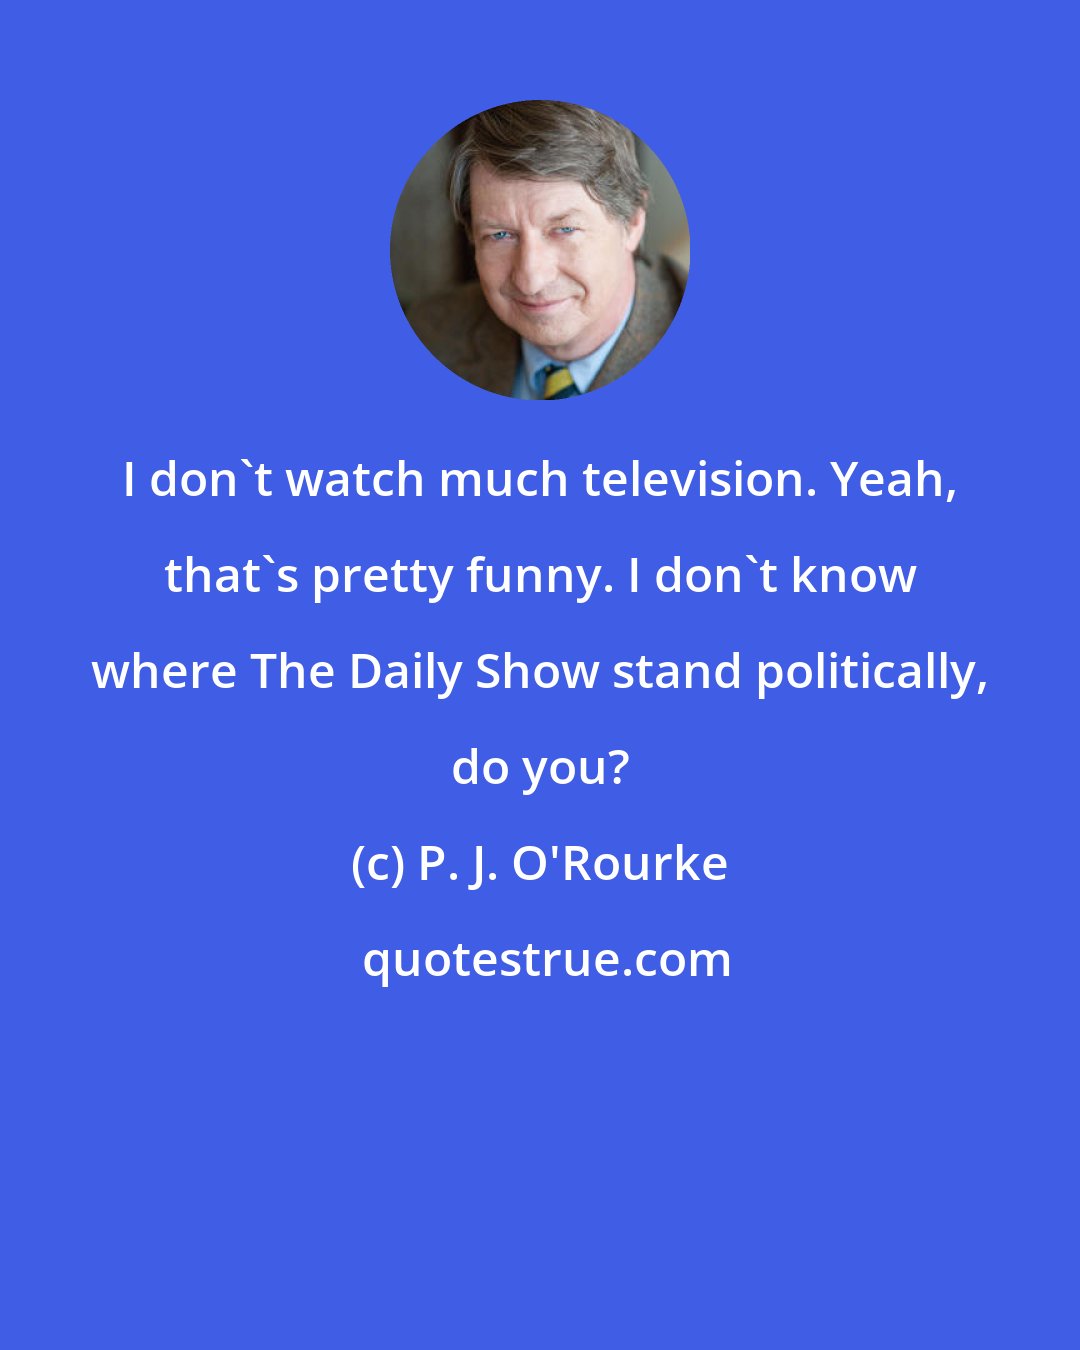 P. J. O'Rourke: I don't watch much television. Yeah, that's pretty funny. I don't know where The Daily Show stand politically, do you?